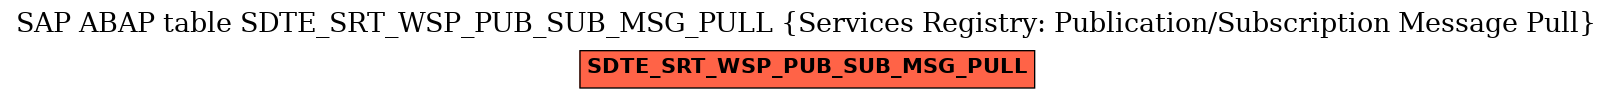 E-R Diagram for table SDTE_SRT_WSP_PUB_SUB_MSG_PULL (Services Registry: Publication/Subscription Message Pull)